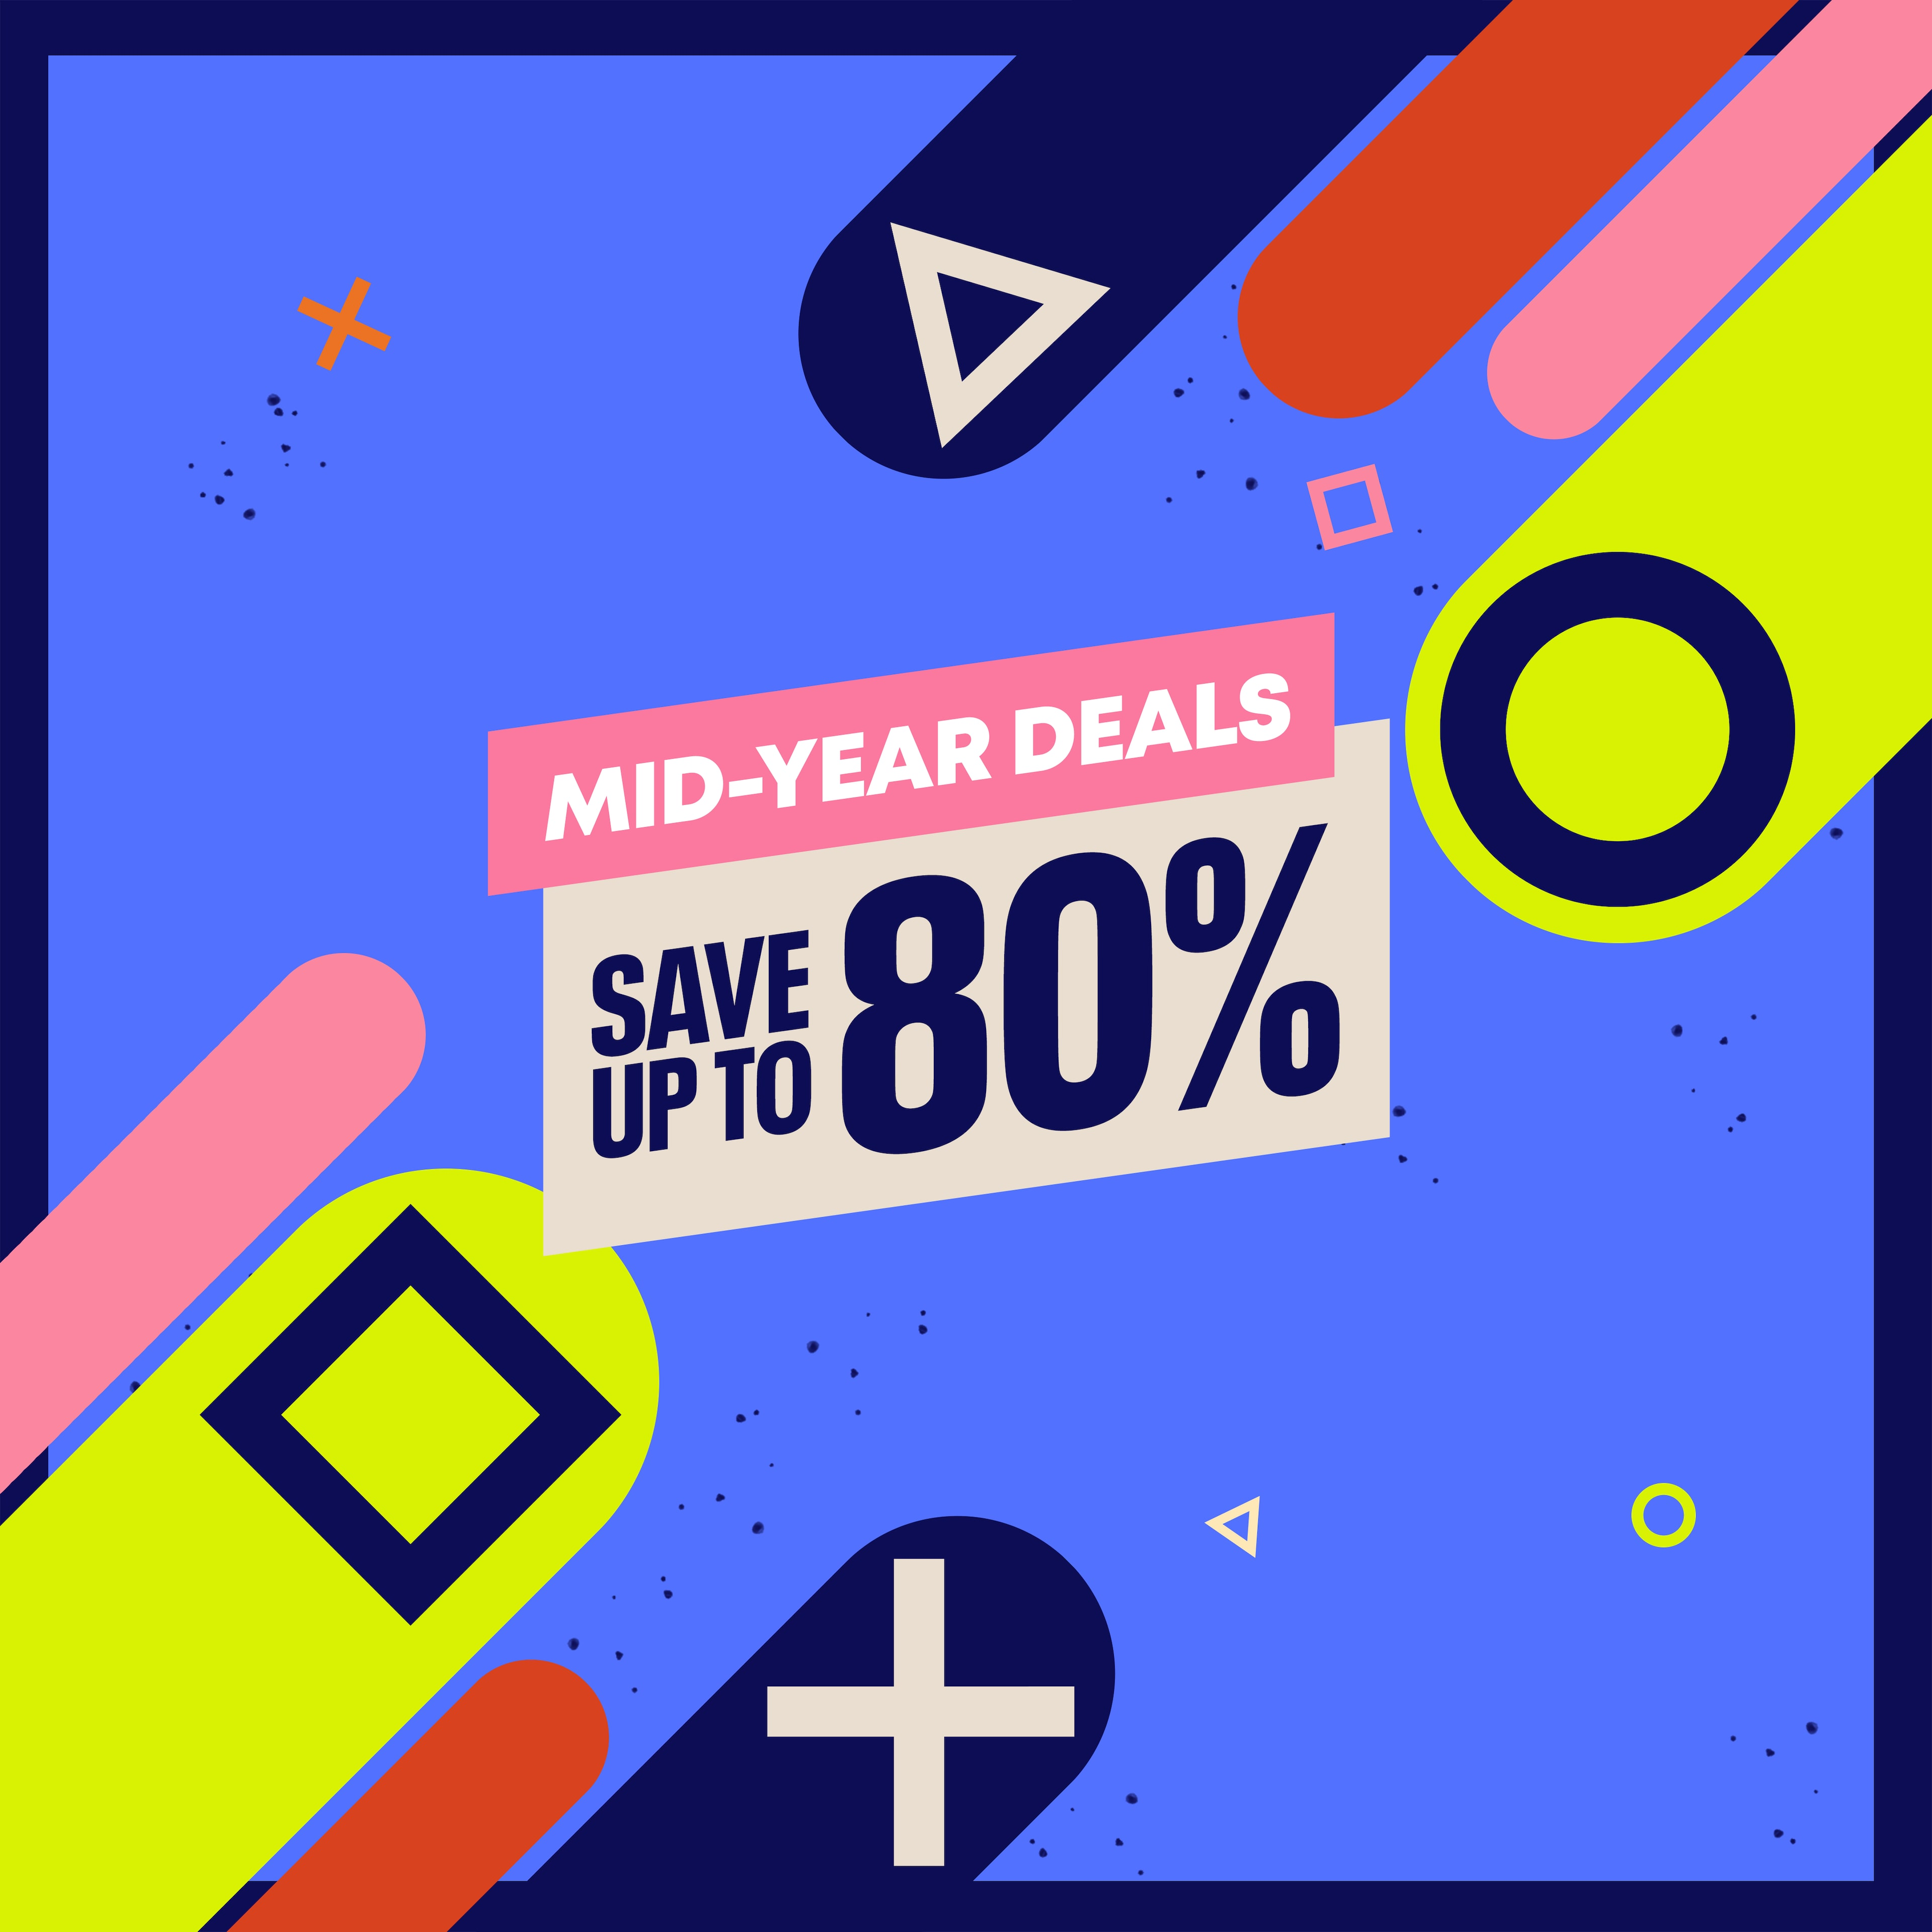 Playstation MID-YEAR DEALS